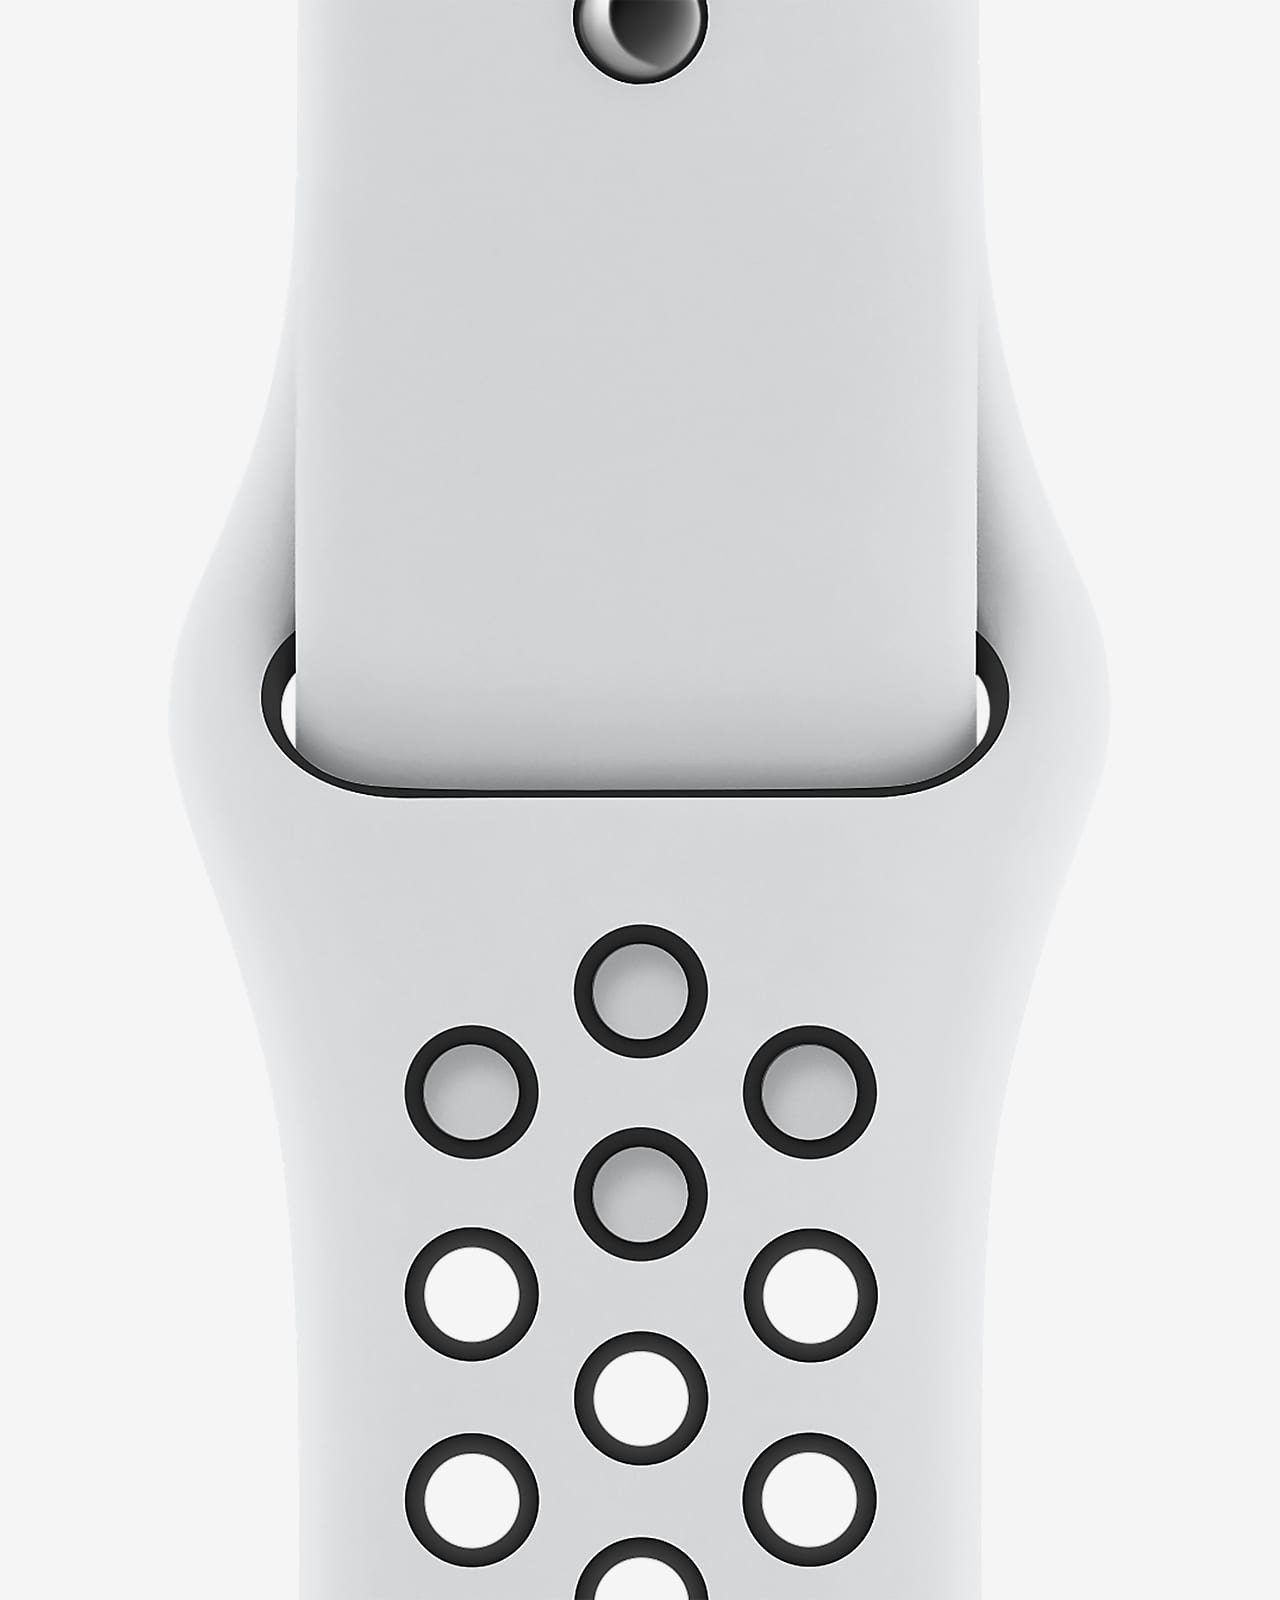 Apple Watch Nike SE (GPS) With Nike Sport Band 44mm Silver Aluminium Case